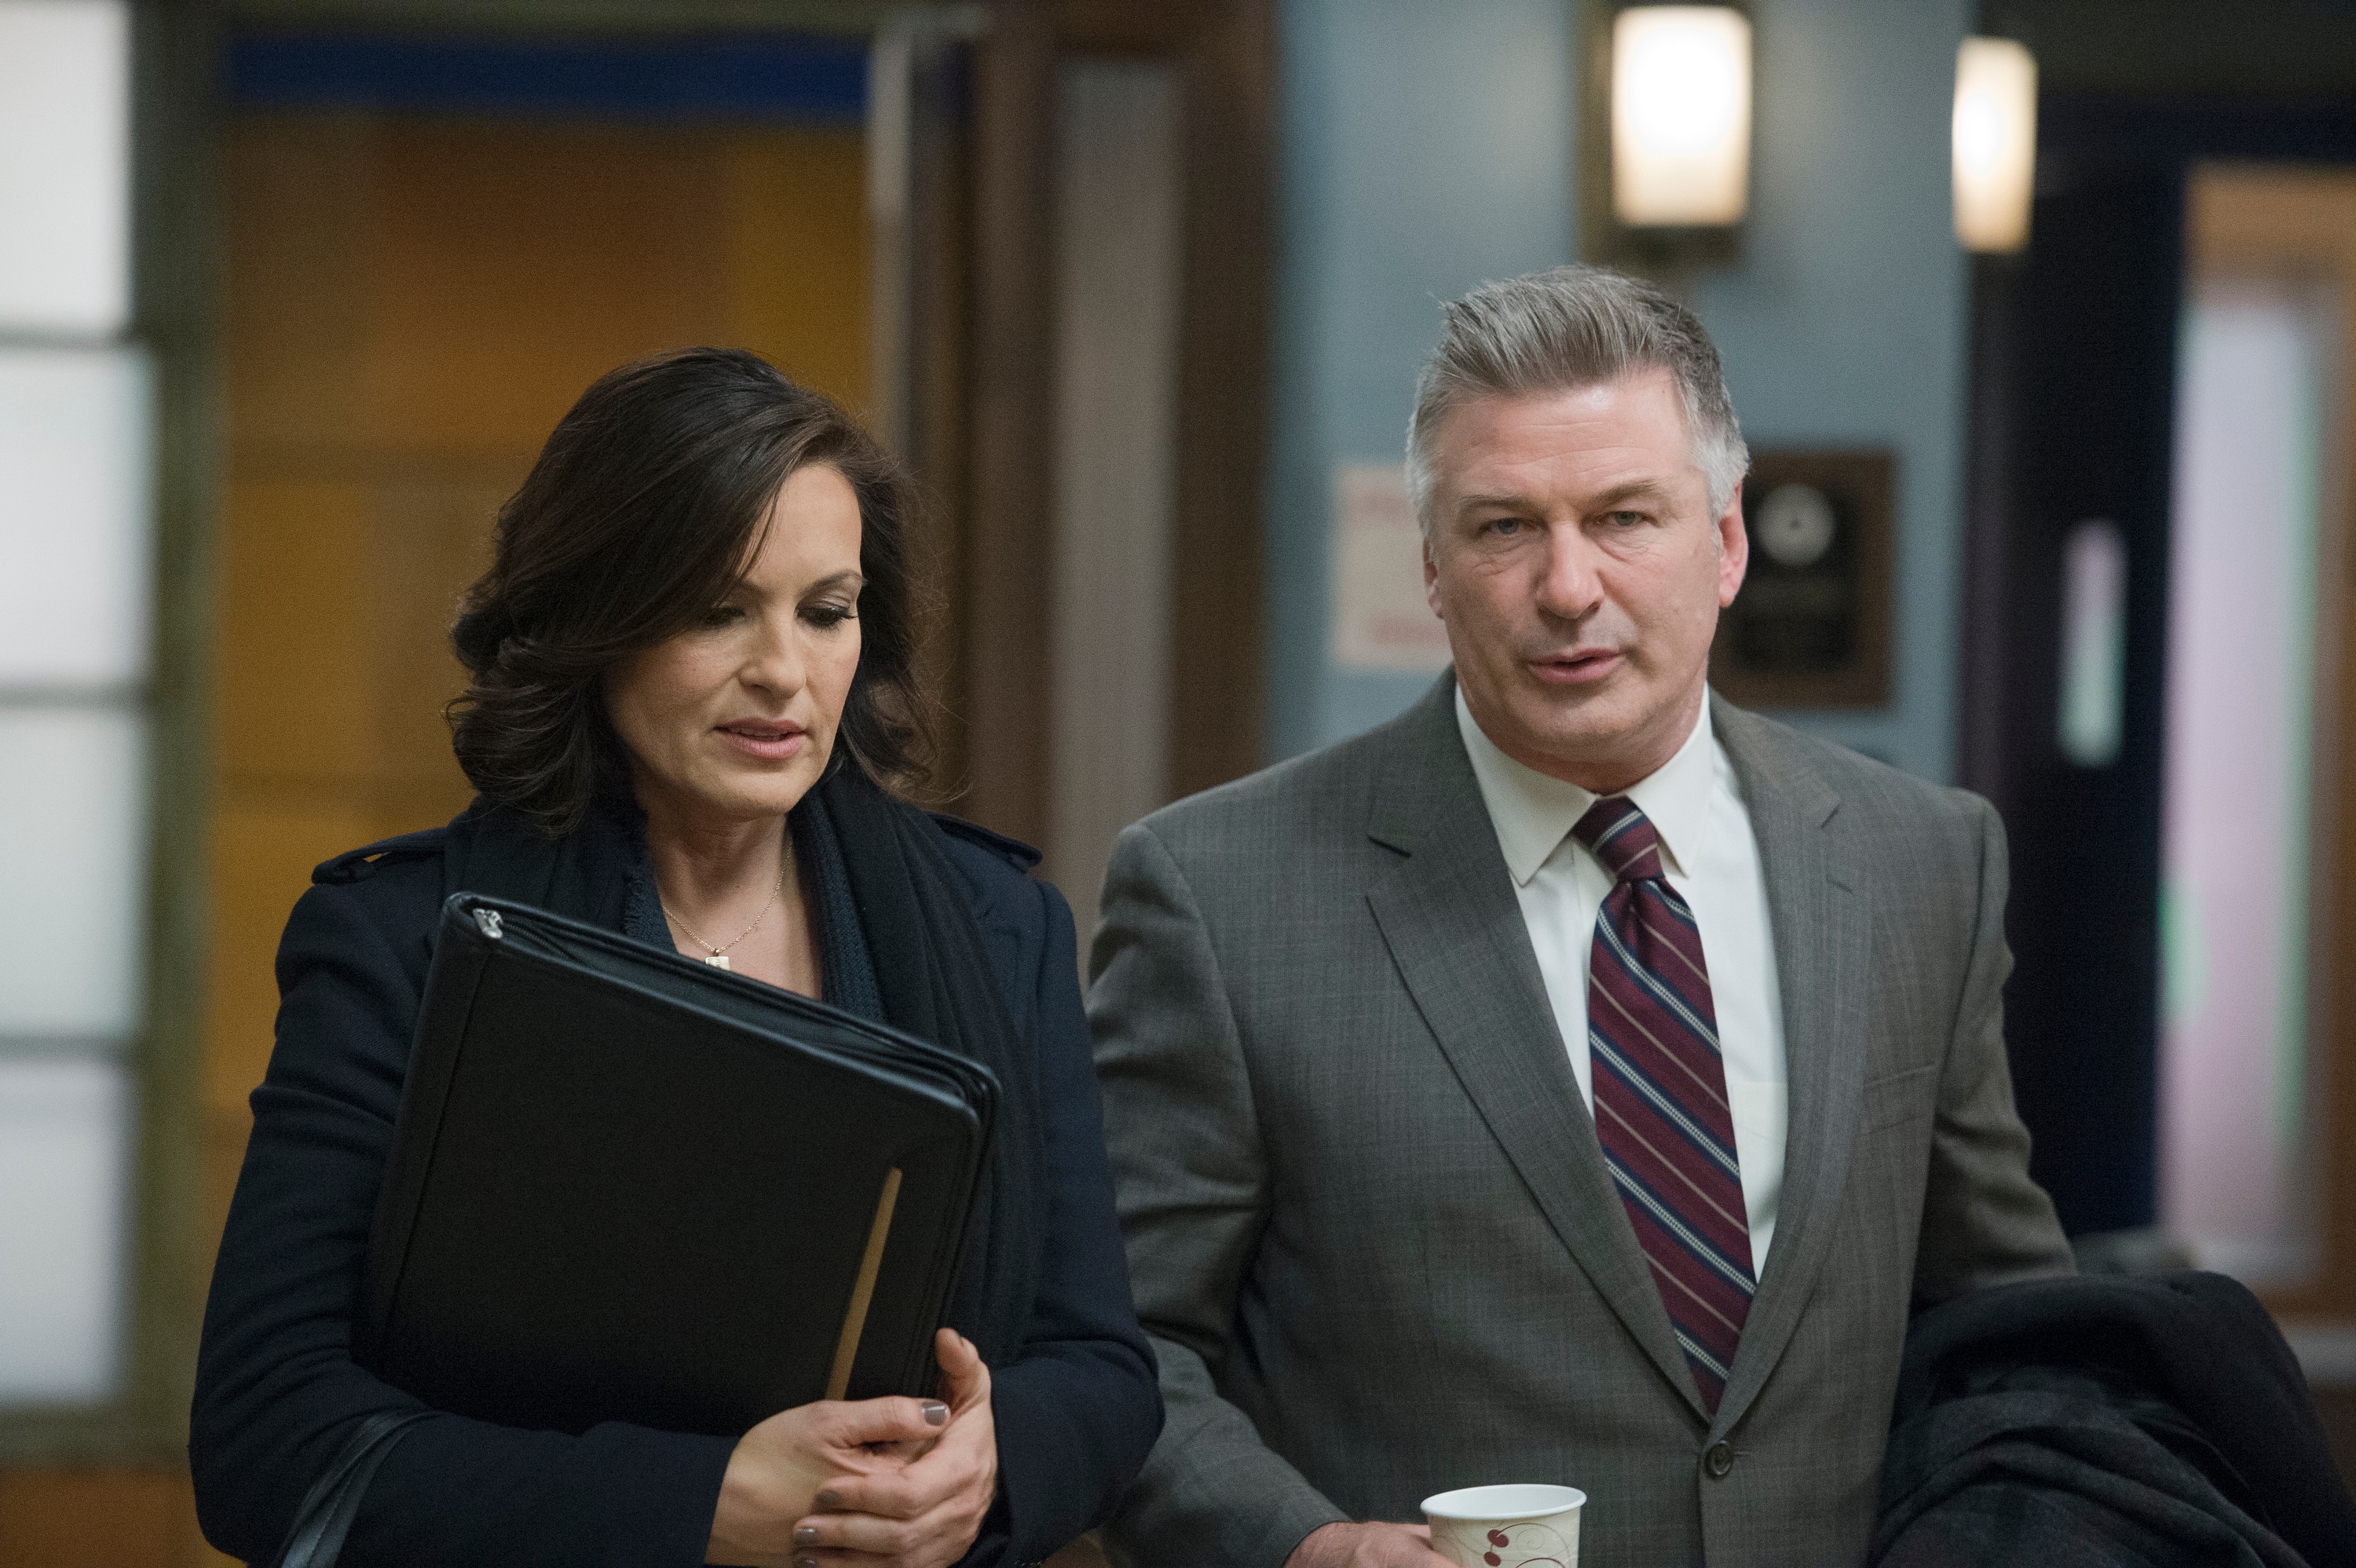 Law & Order: Special Victims Unit: Photos from "Criminal S...